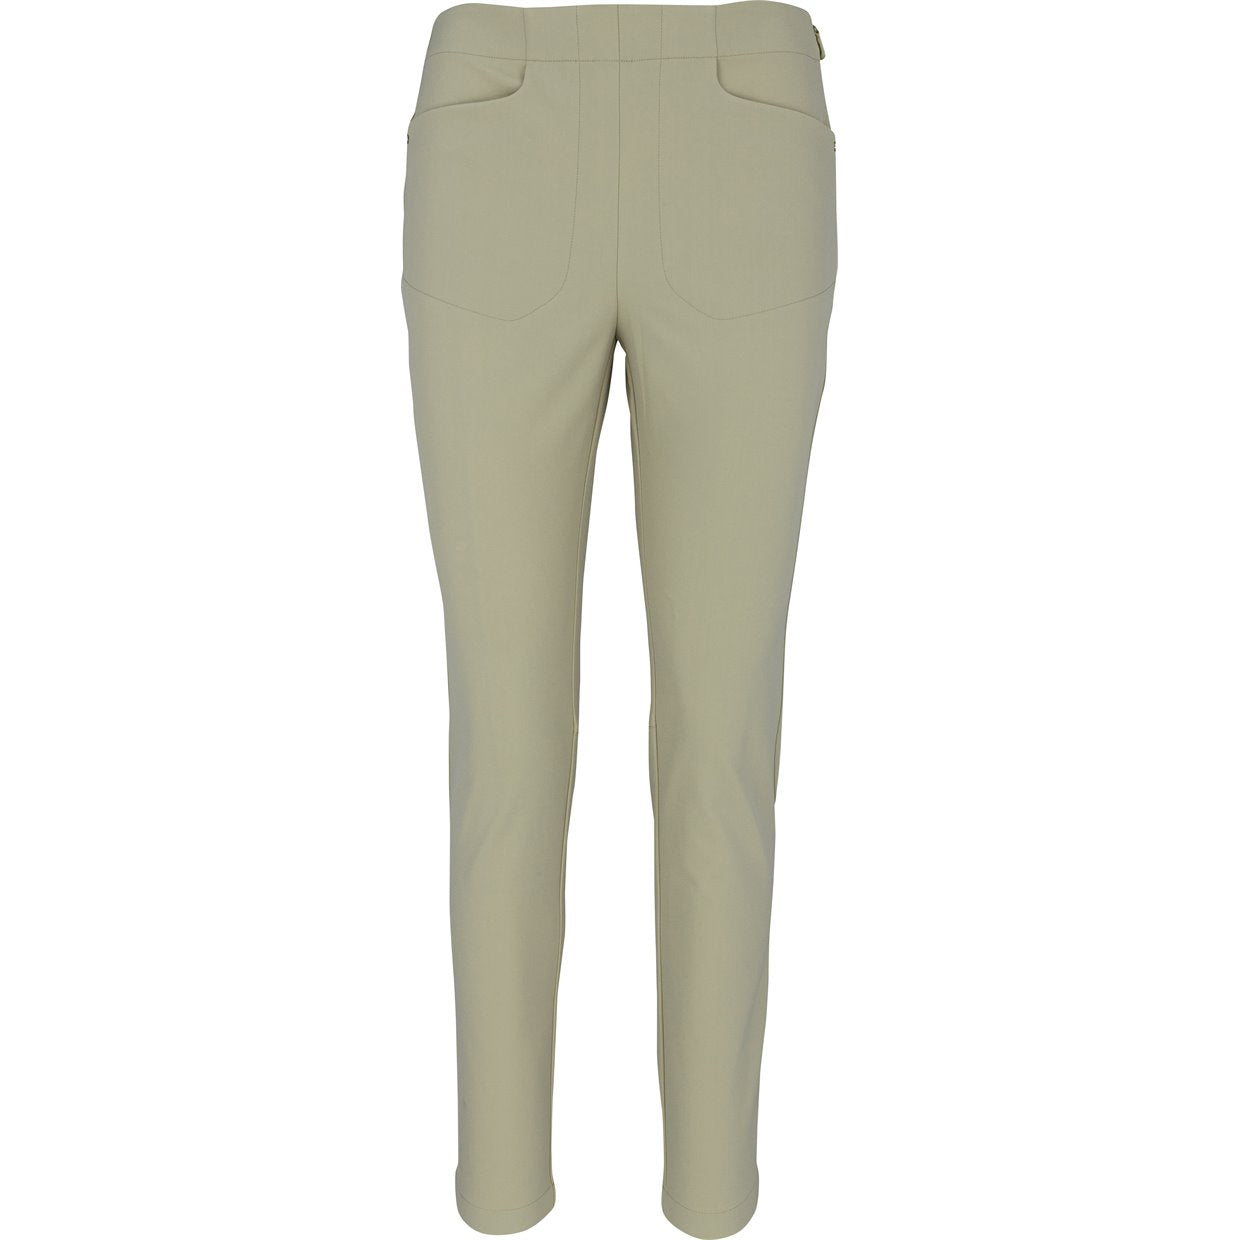 Golf Trousers for Women - Golfplanet, your golf specialised shop